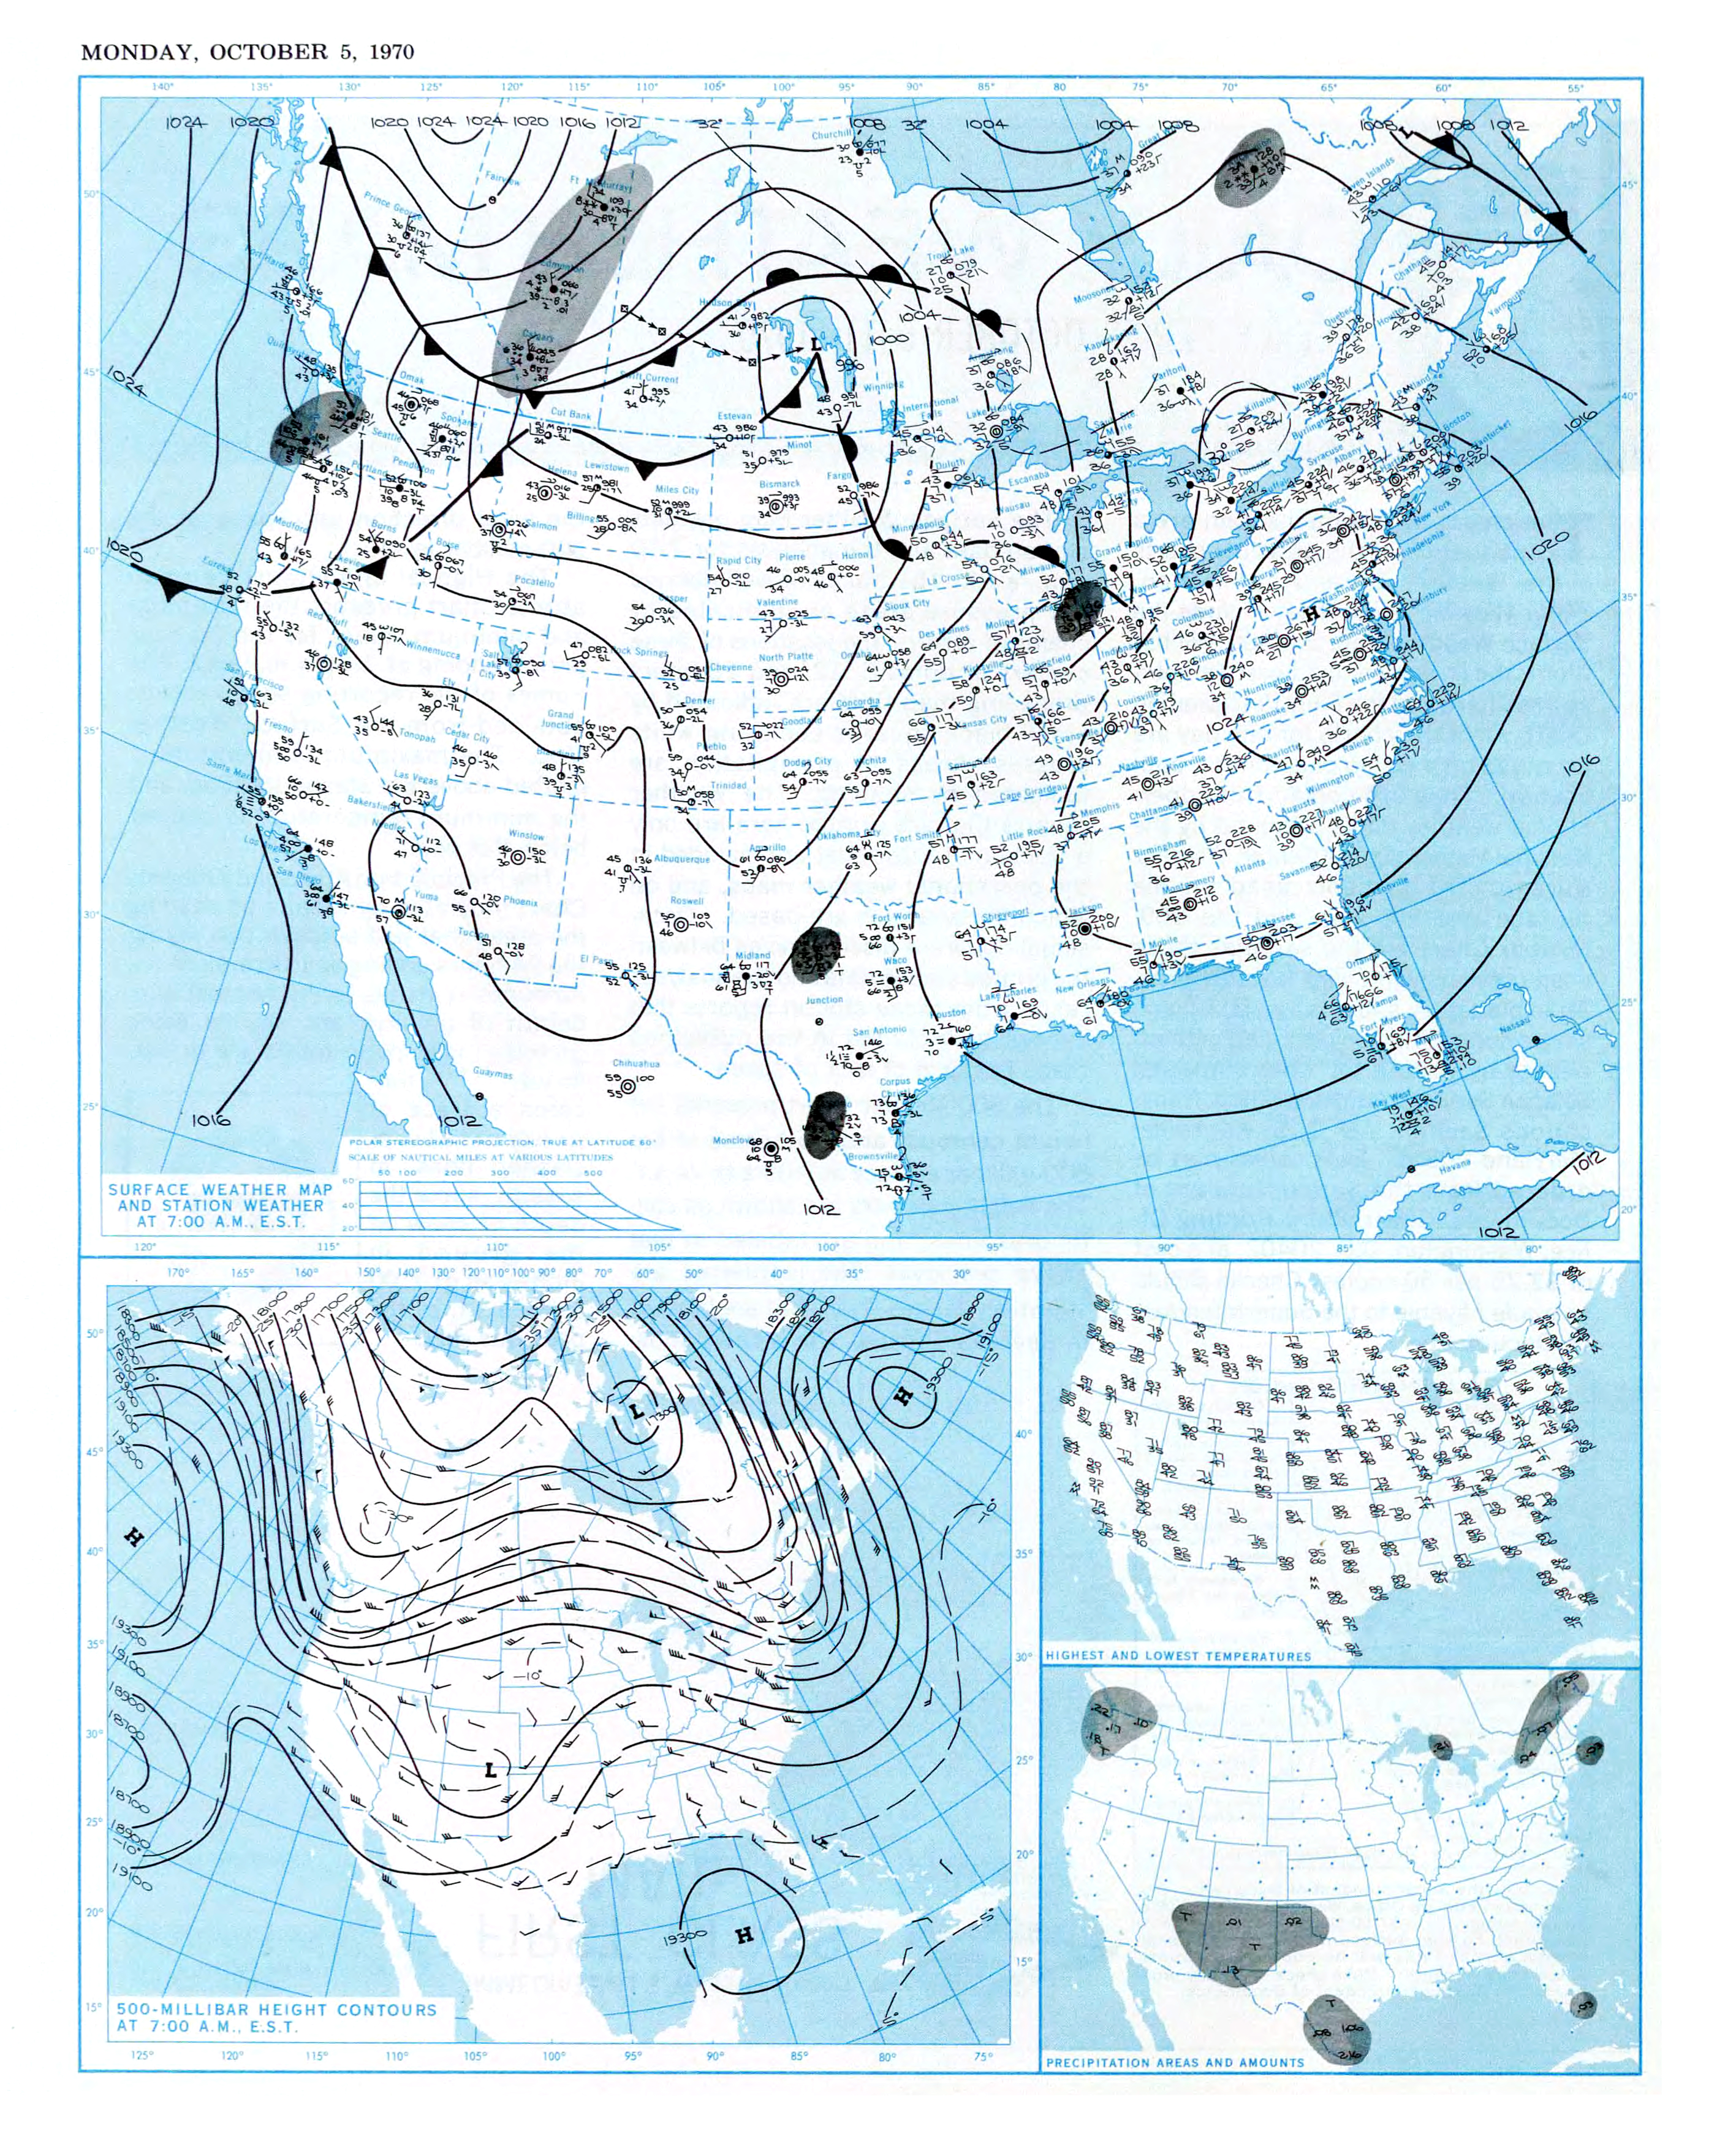 A NOAA weather map from October 5, 1970.